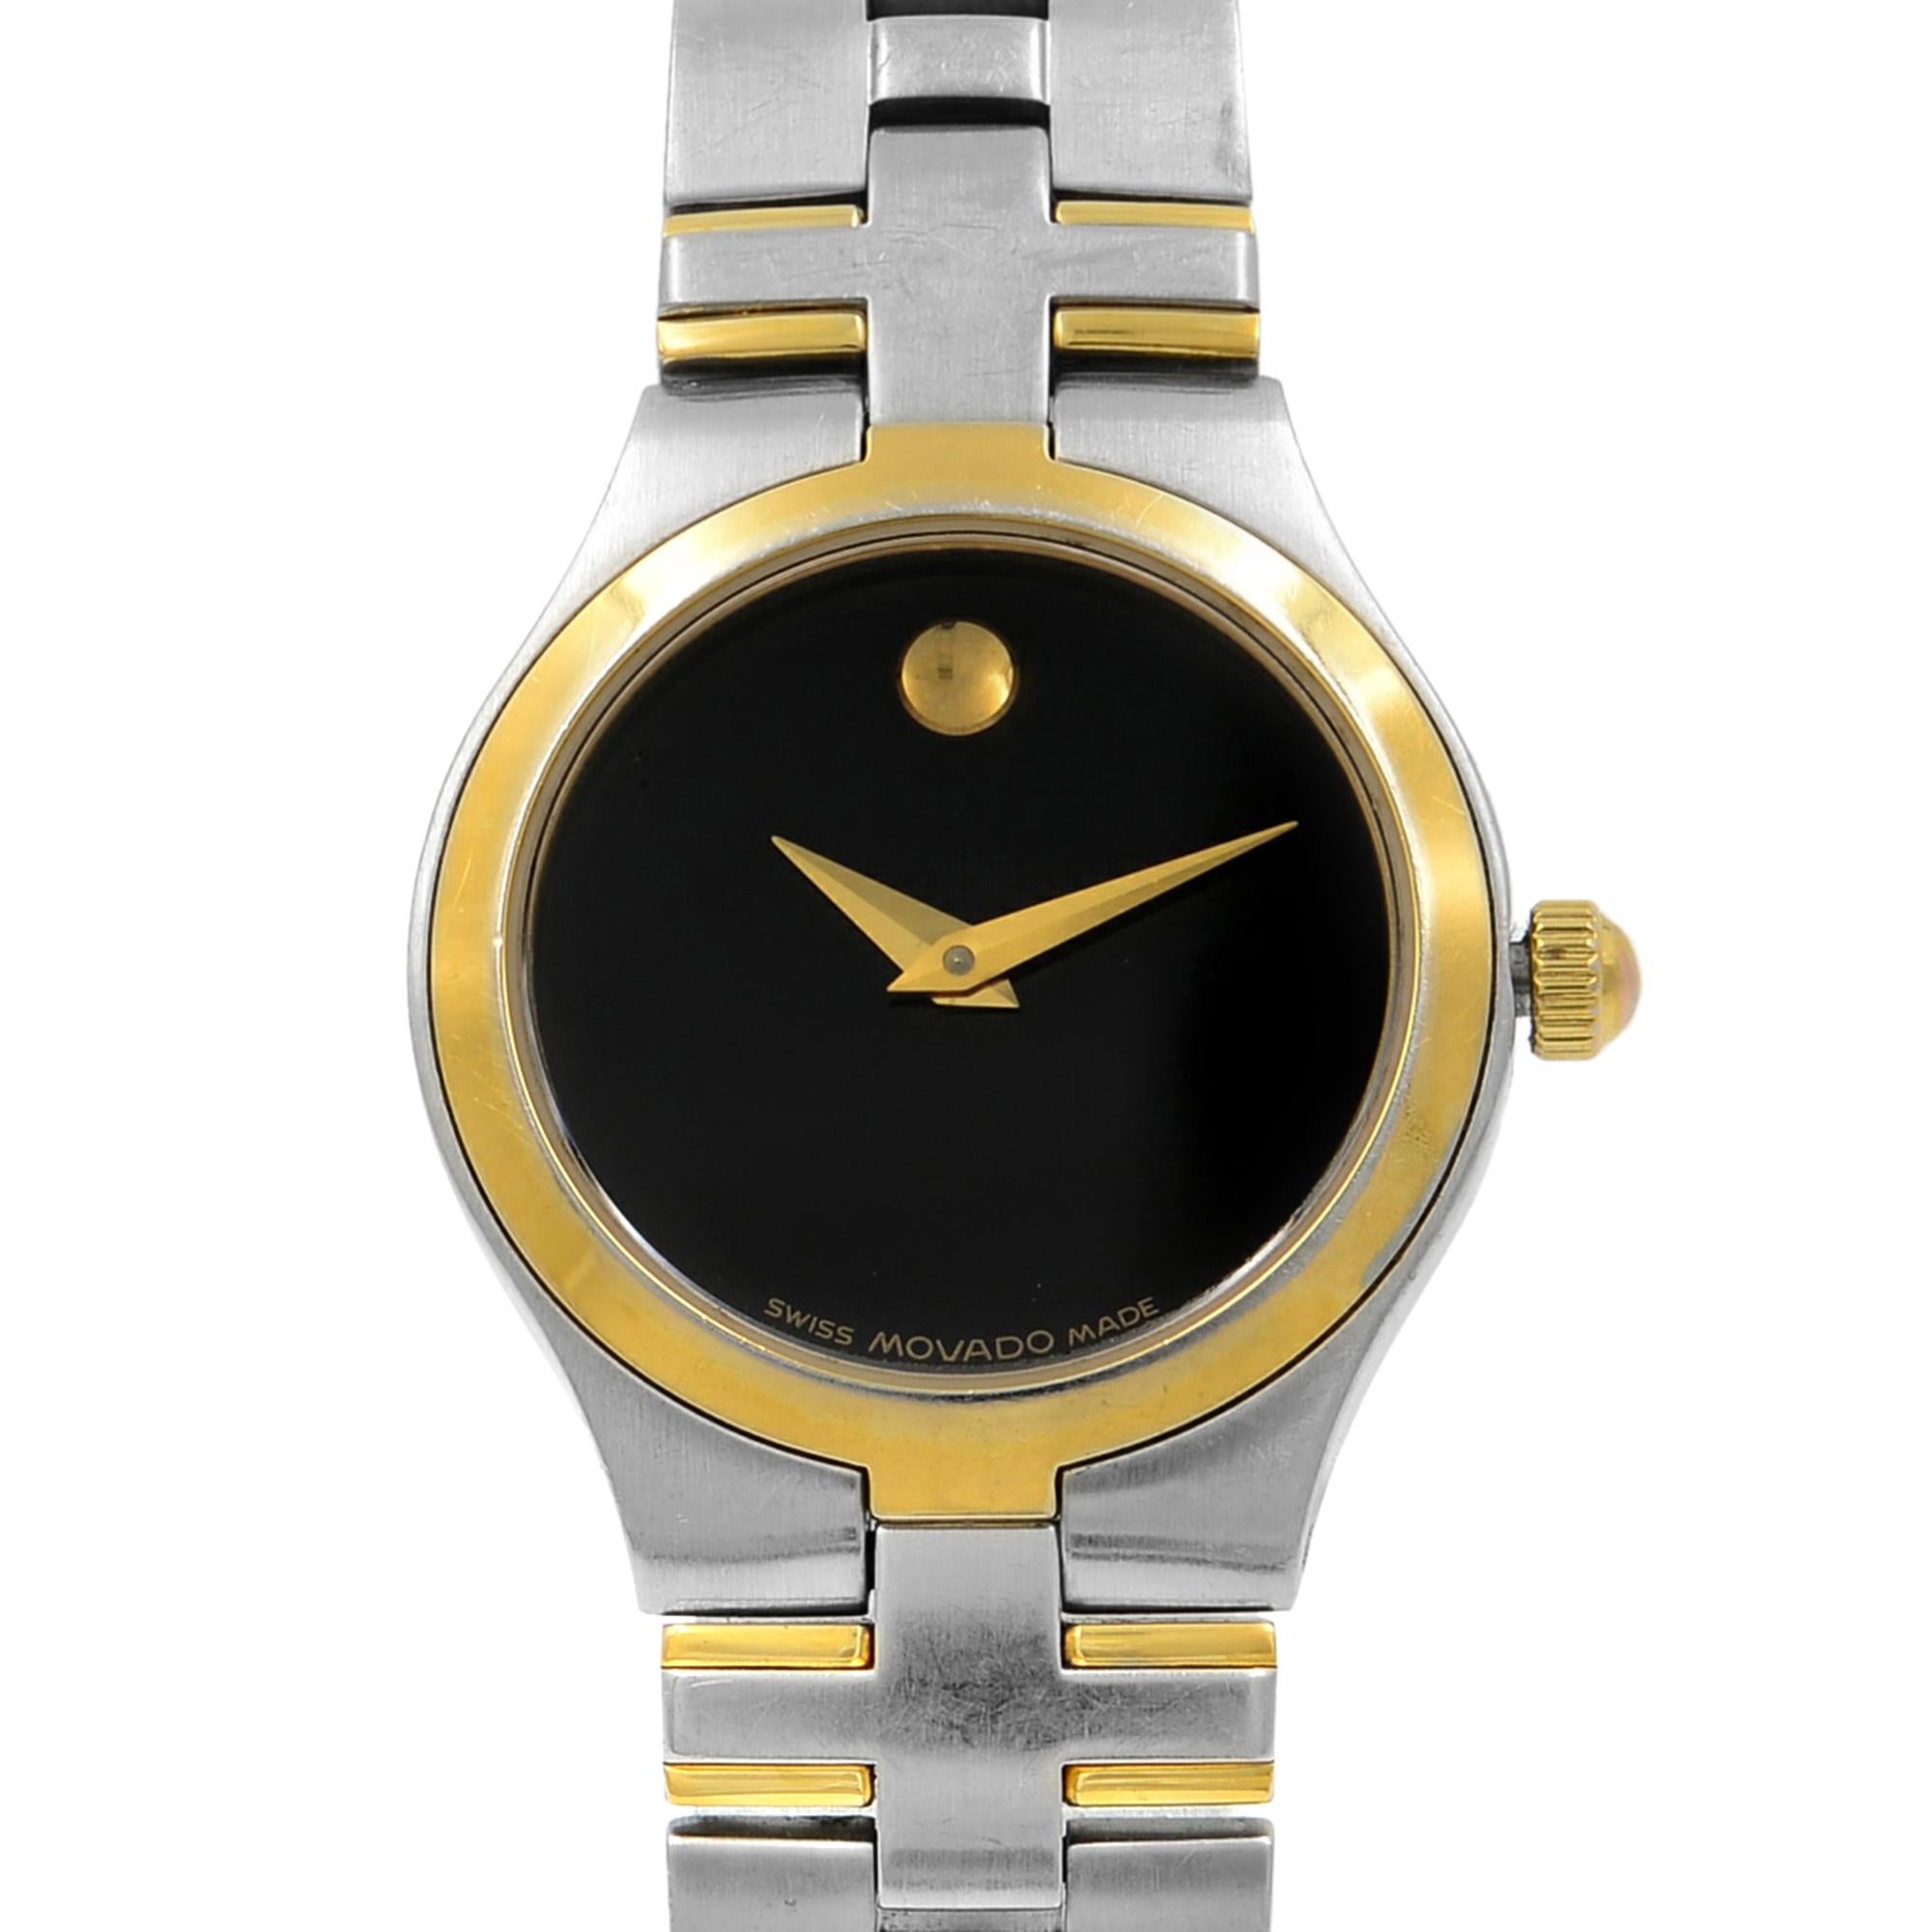 This pre-owned Movado Juro  0605031  is a beautiful Ladies timepiece that is powered by a quartz movement which is cased in a stainless steel case. It has a round shape face, no features dial and has hand unspecified style markers. It is completed